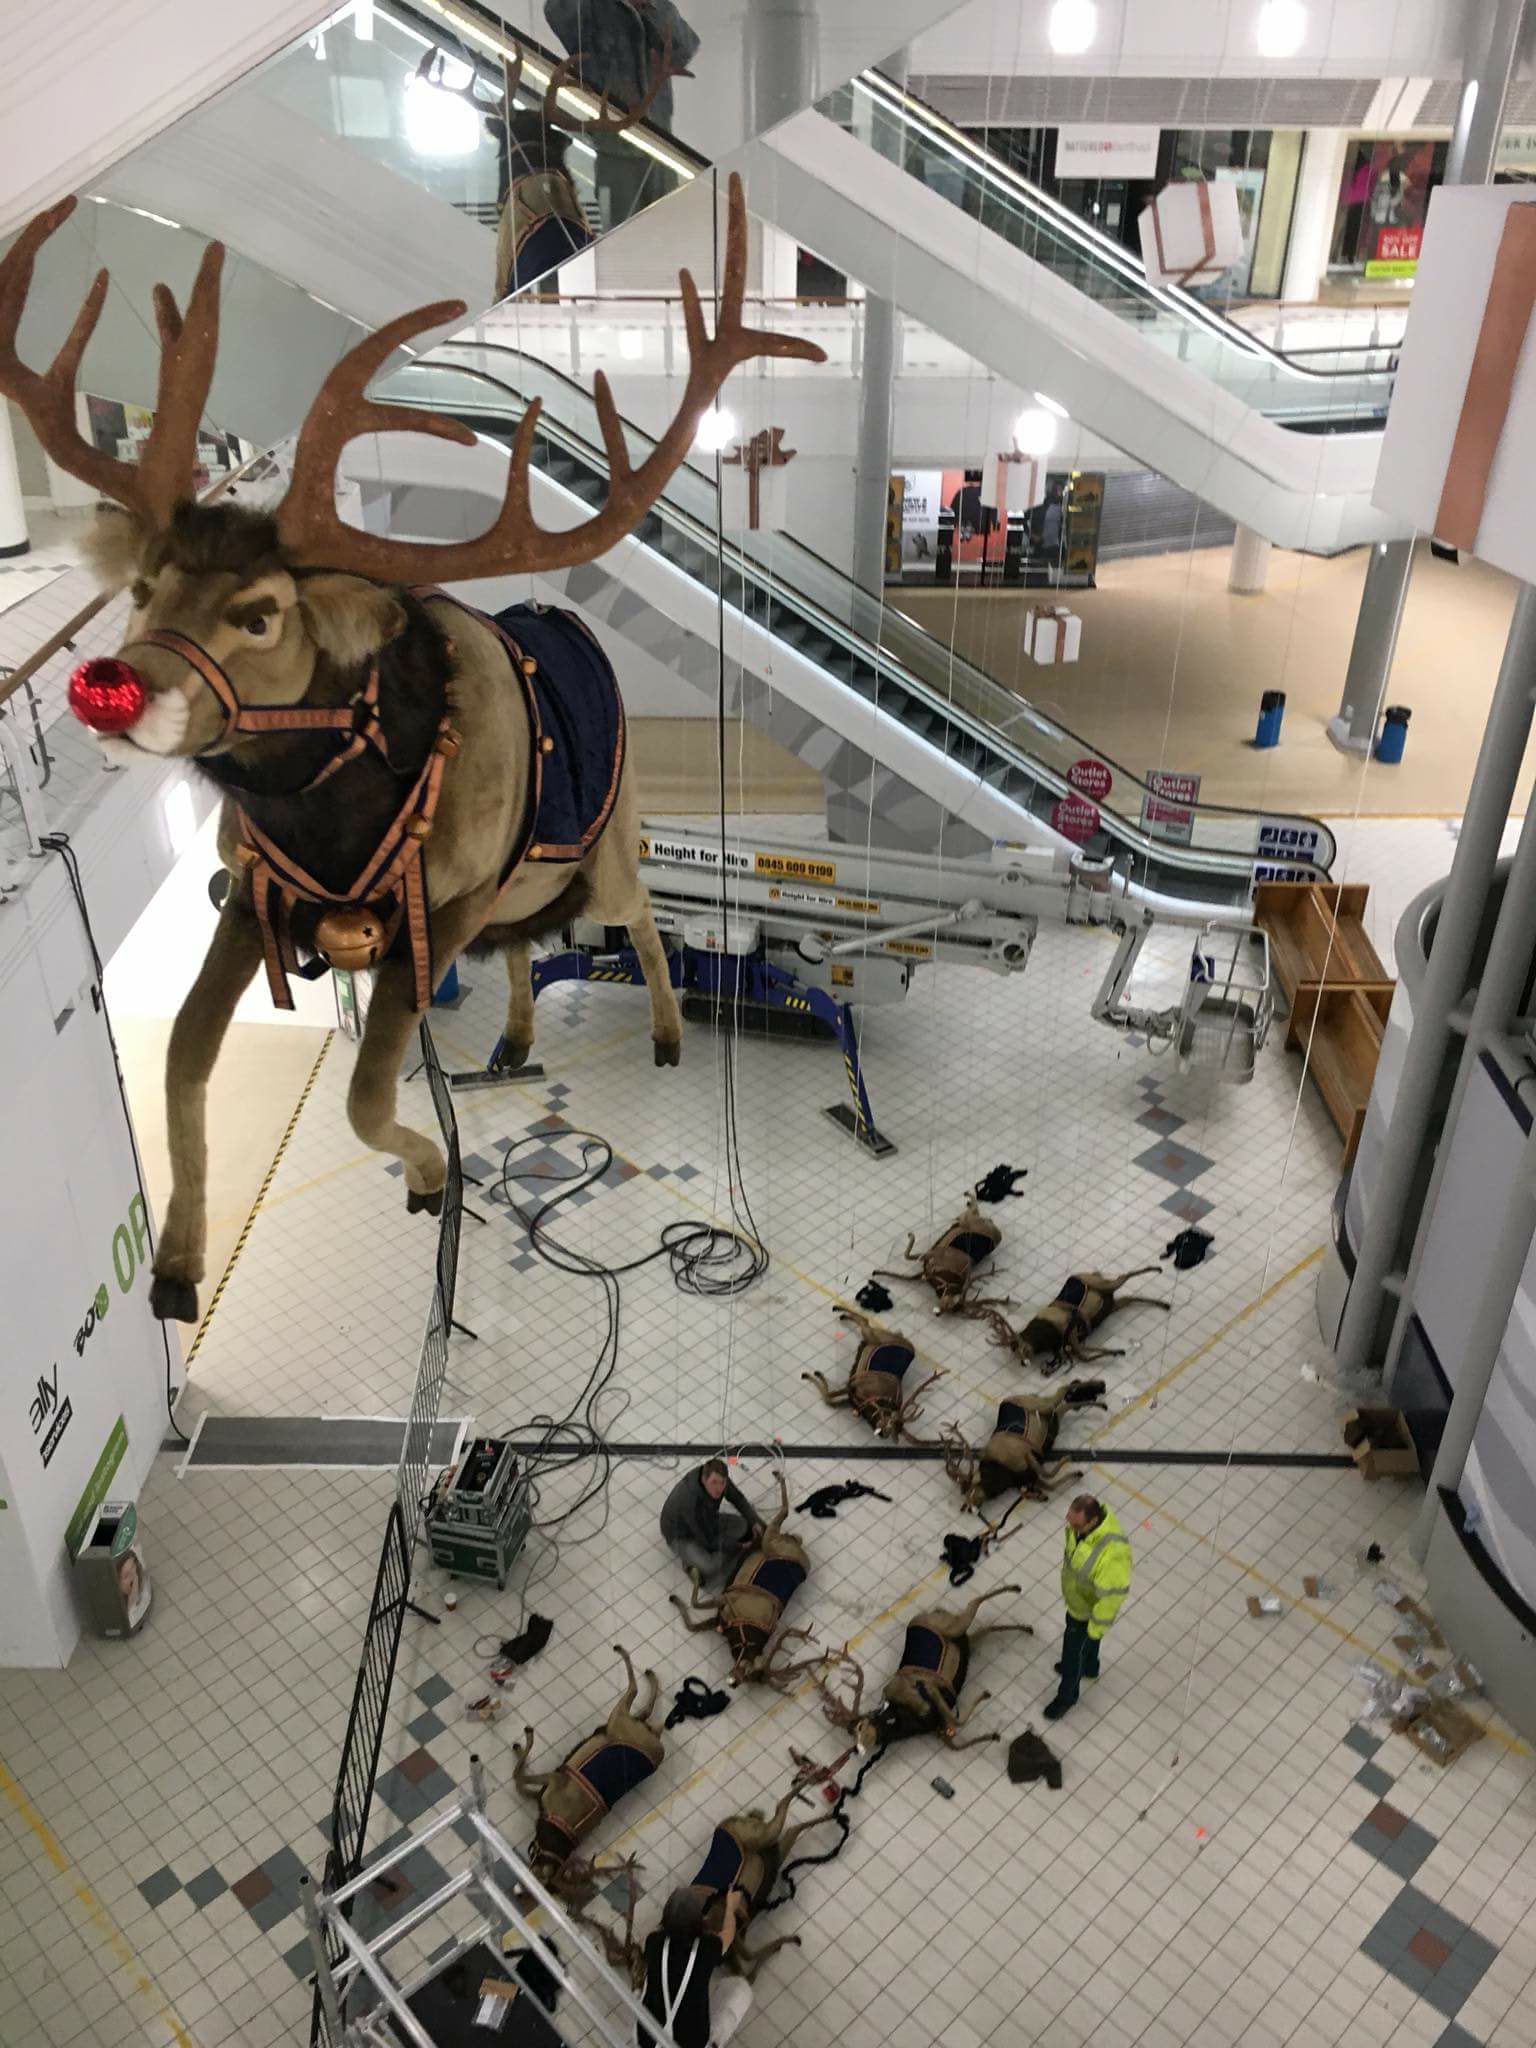 rudolph the red nose reindeer 2, rudolph's revenge